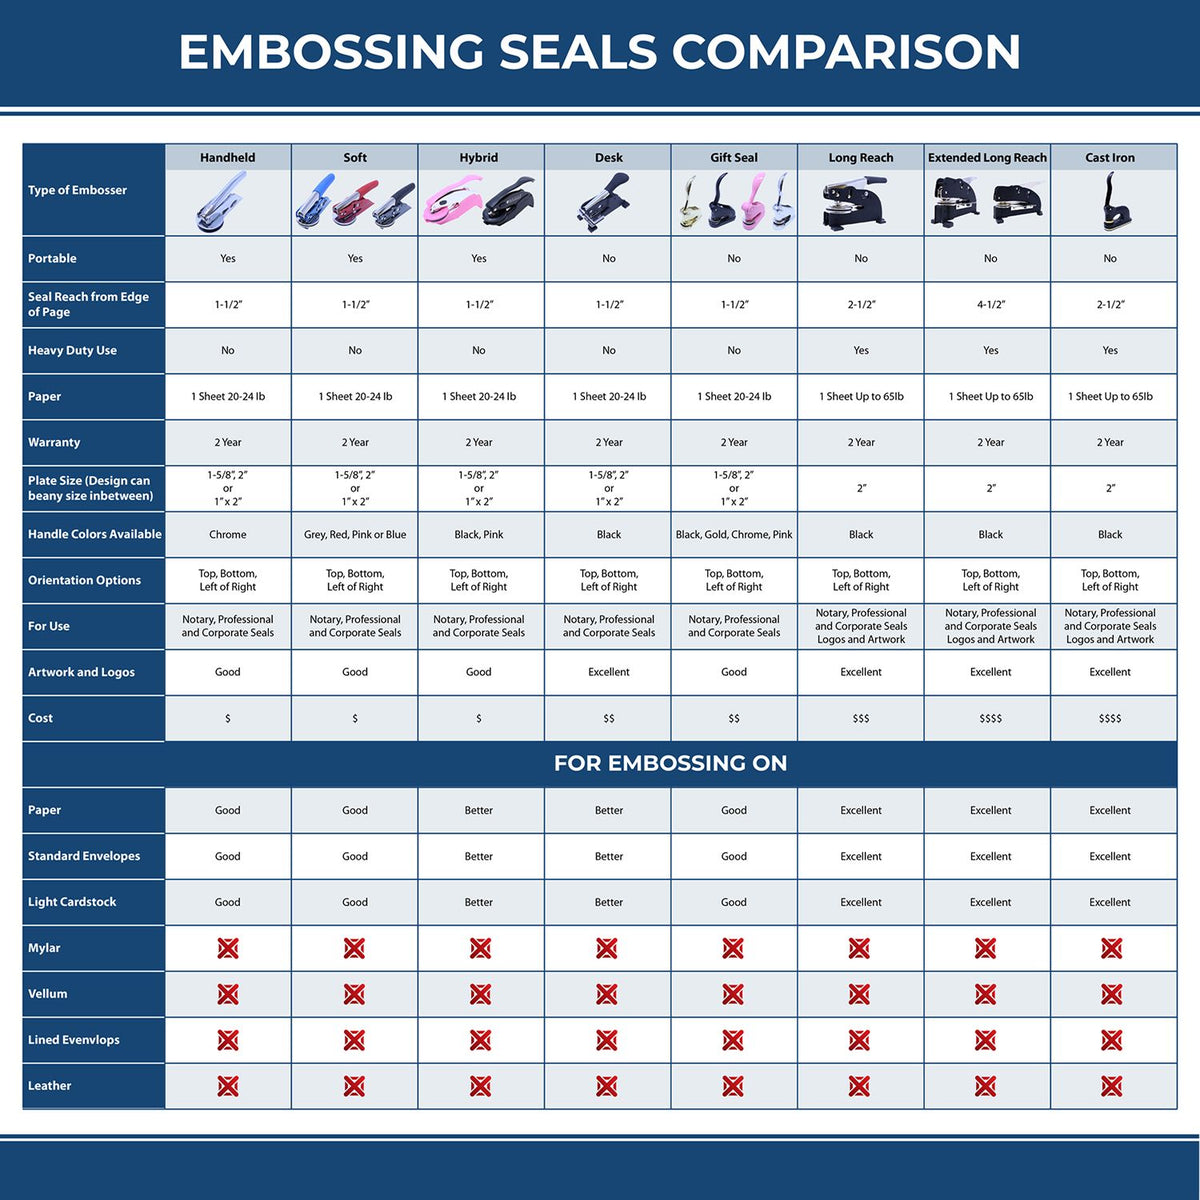 A comparison chart for the different types of mount models available for the Hybrid Vermont Engineer Seal